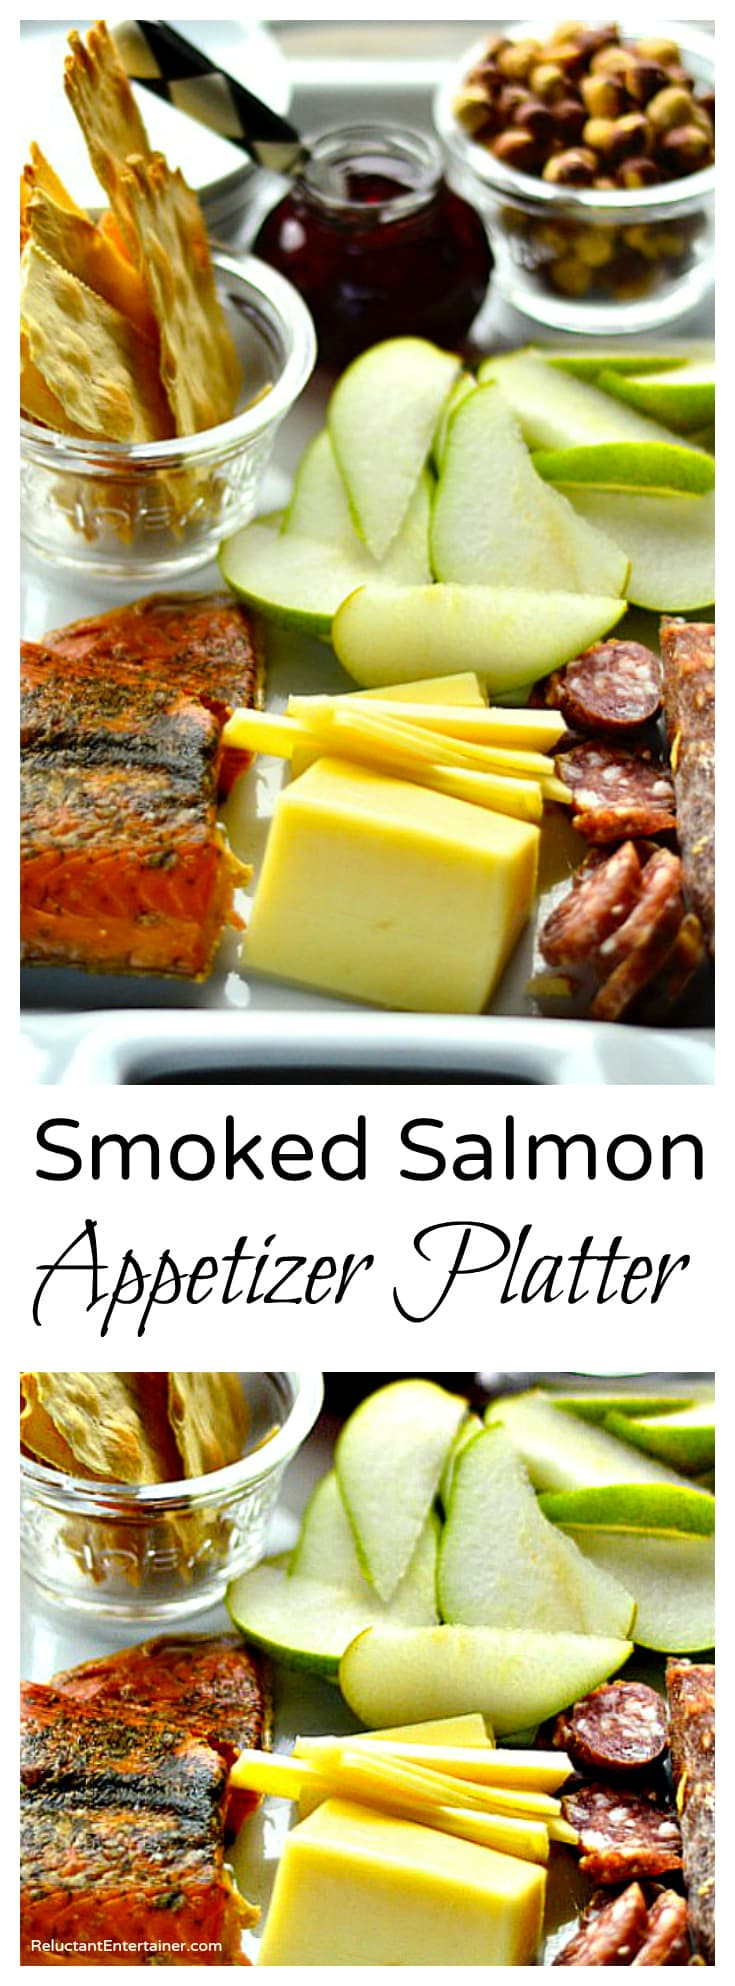 Smoked Salmon And Crackers Appetizer
 Smoked Salmon Appetizer Platter Reluctant Entertainer